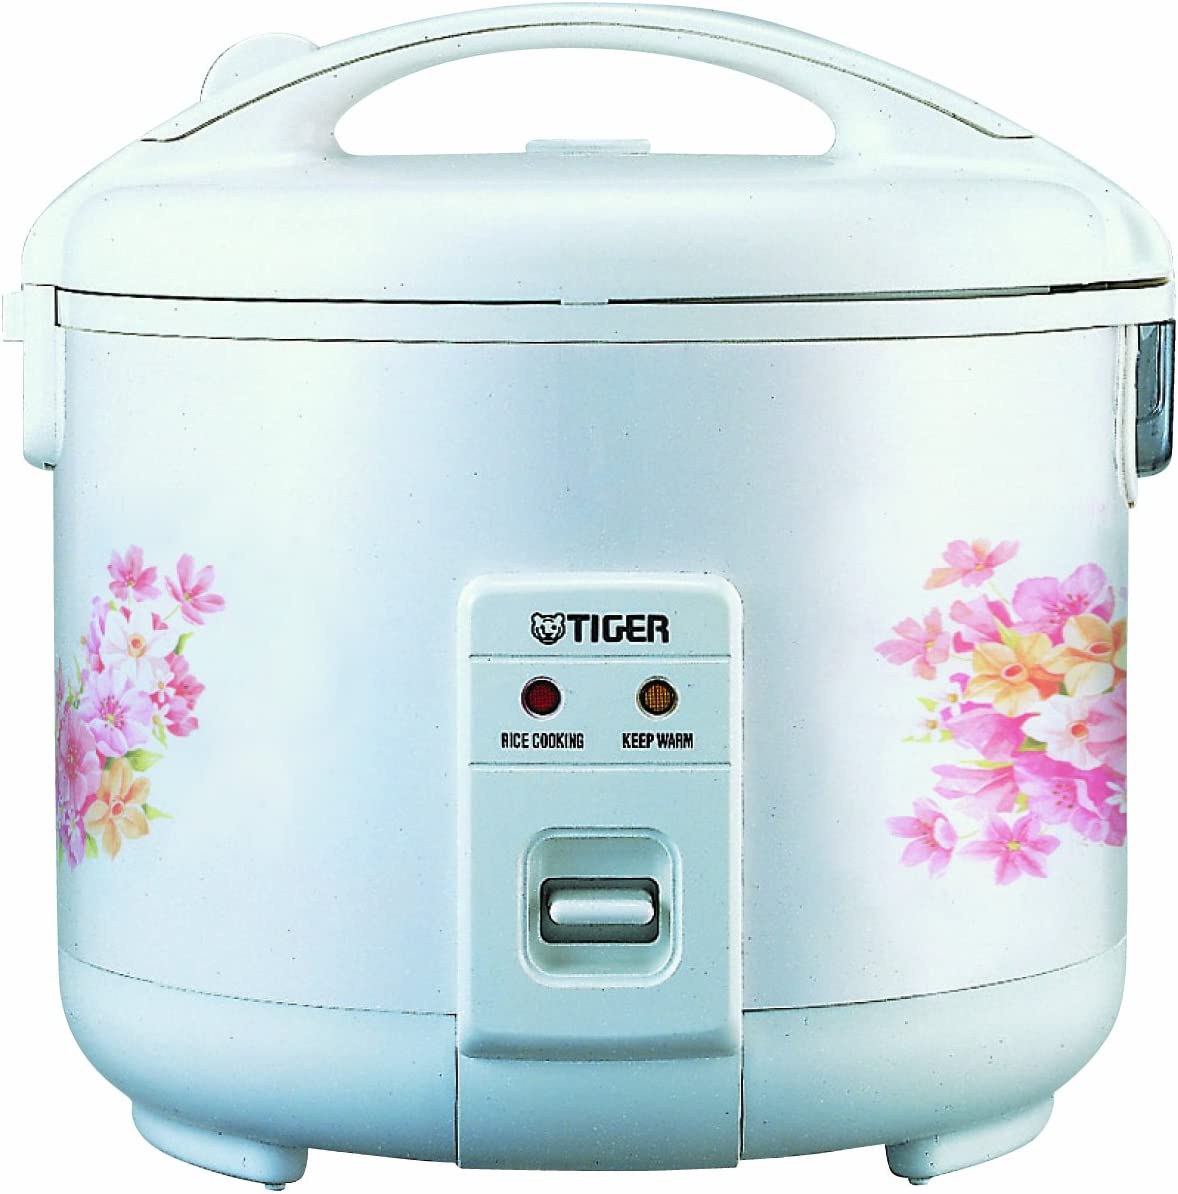 Tiger Rice Cooker and Warmer, 3-Cup (Uncooked)